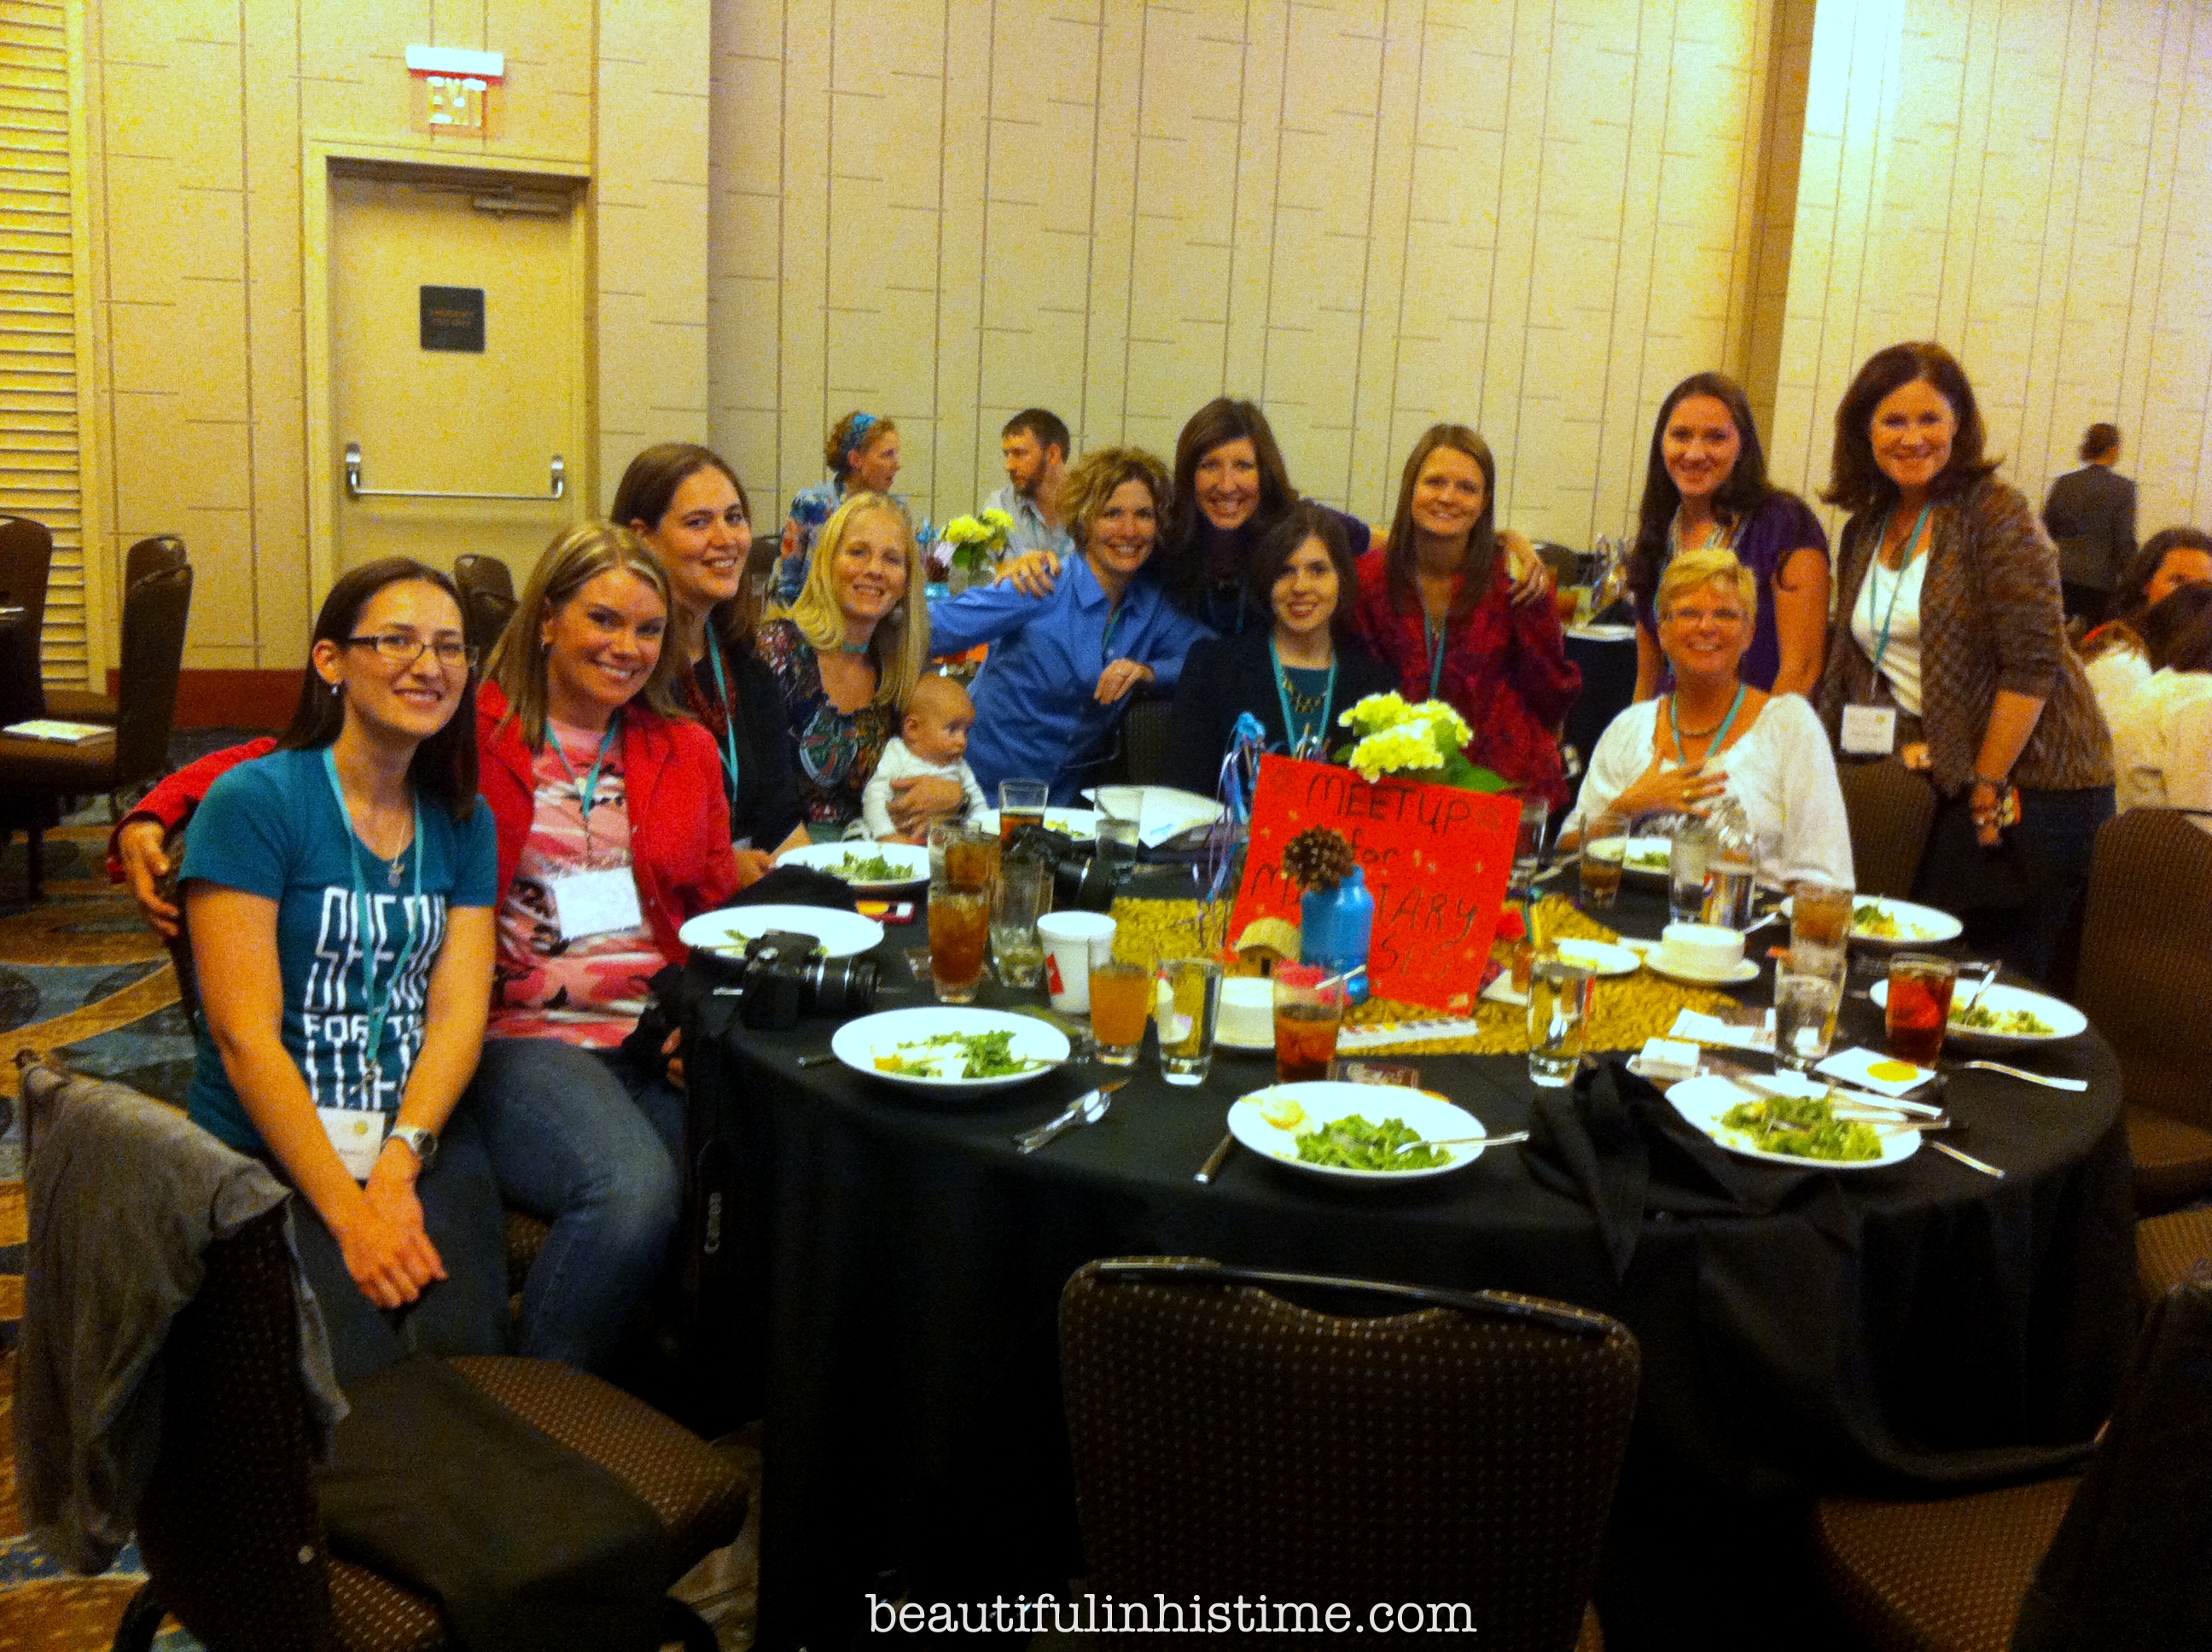 She made time for me {takeaways from #allume}